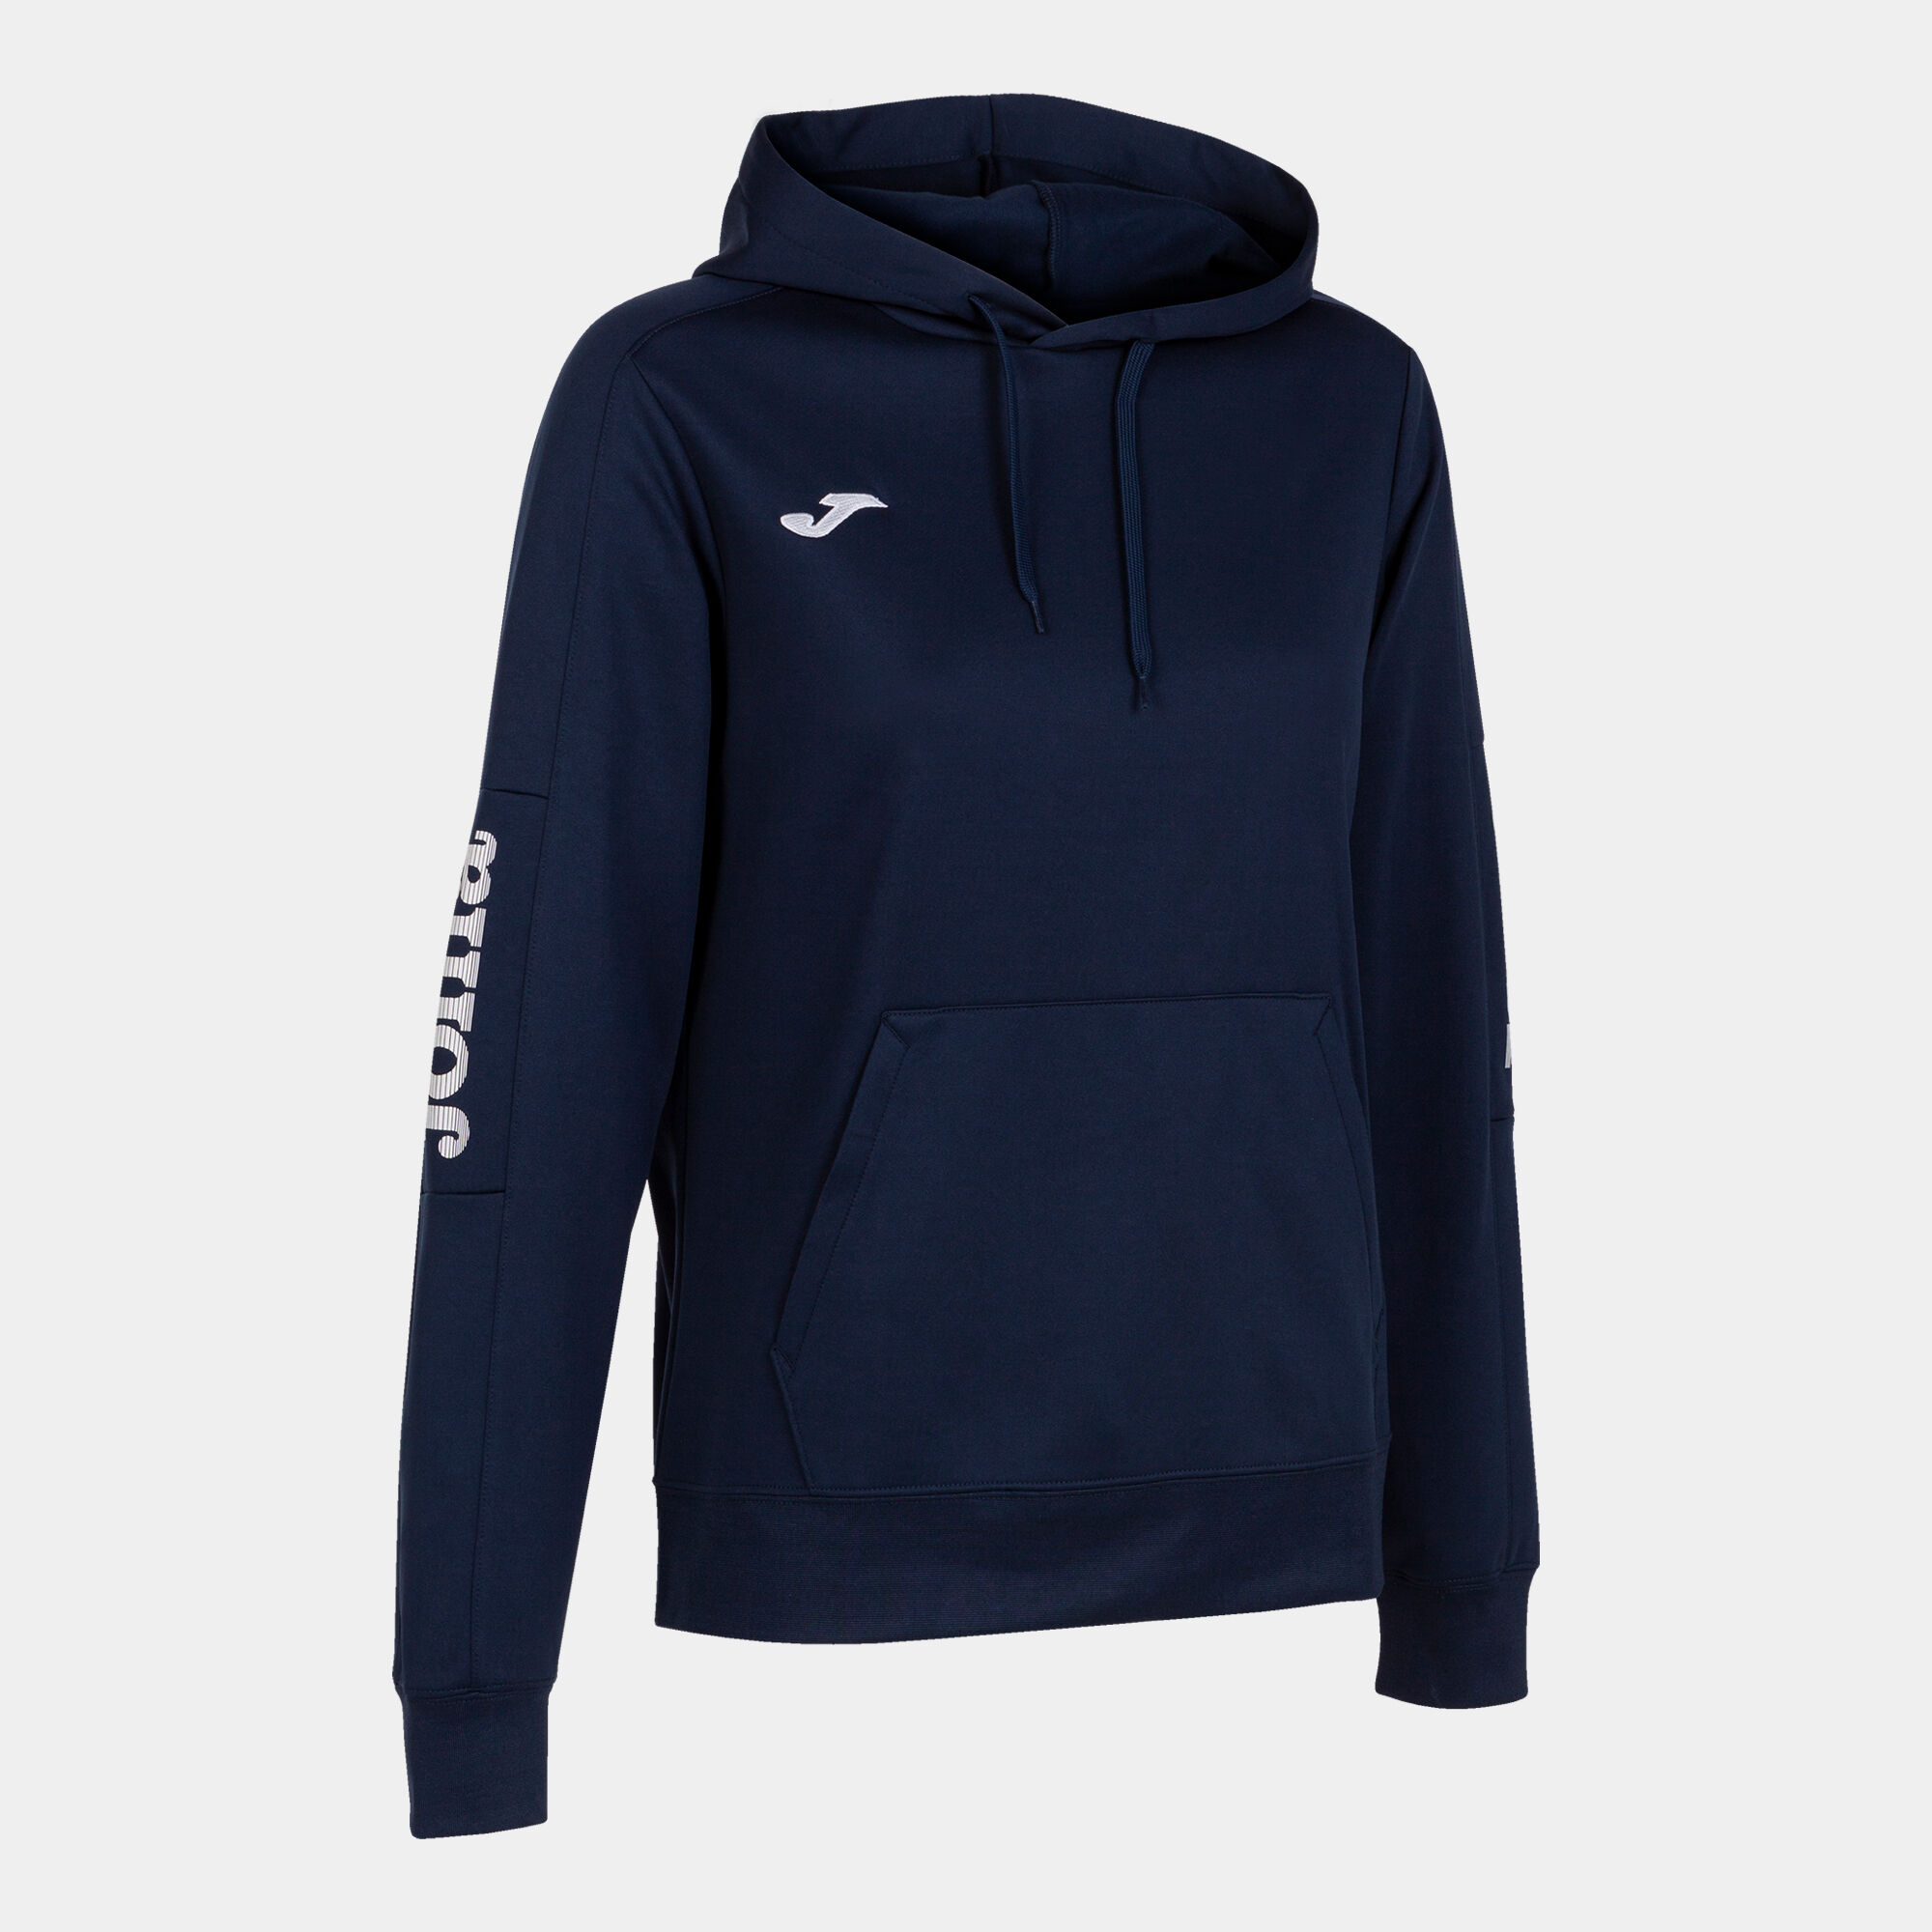 Hooded sweater woman Championship IV navy blue